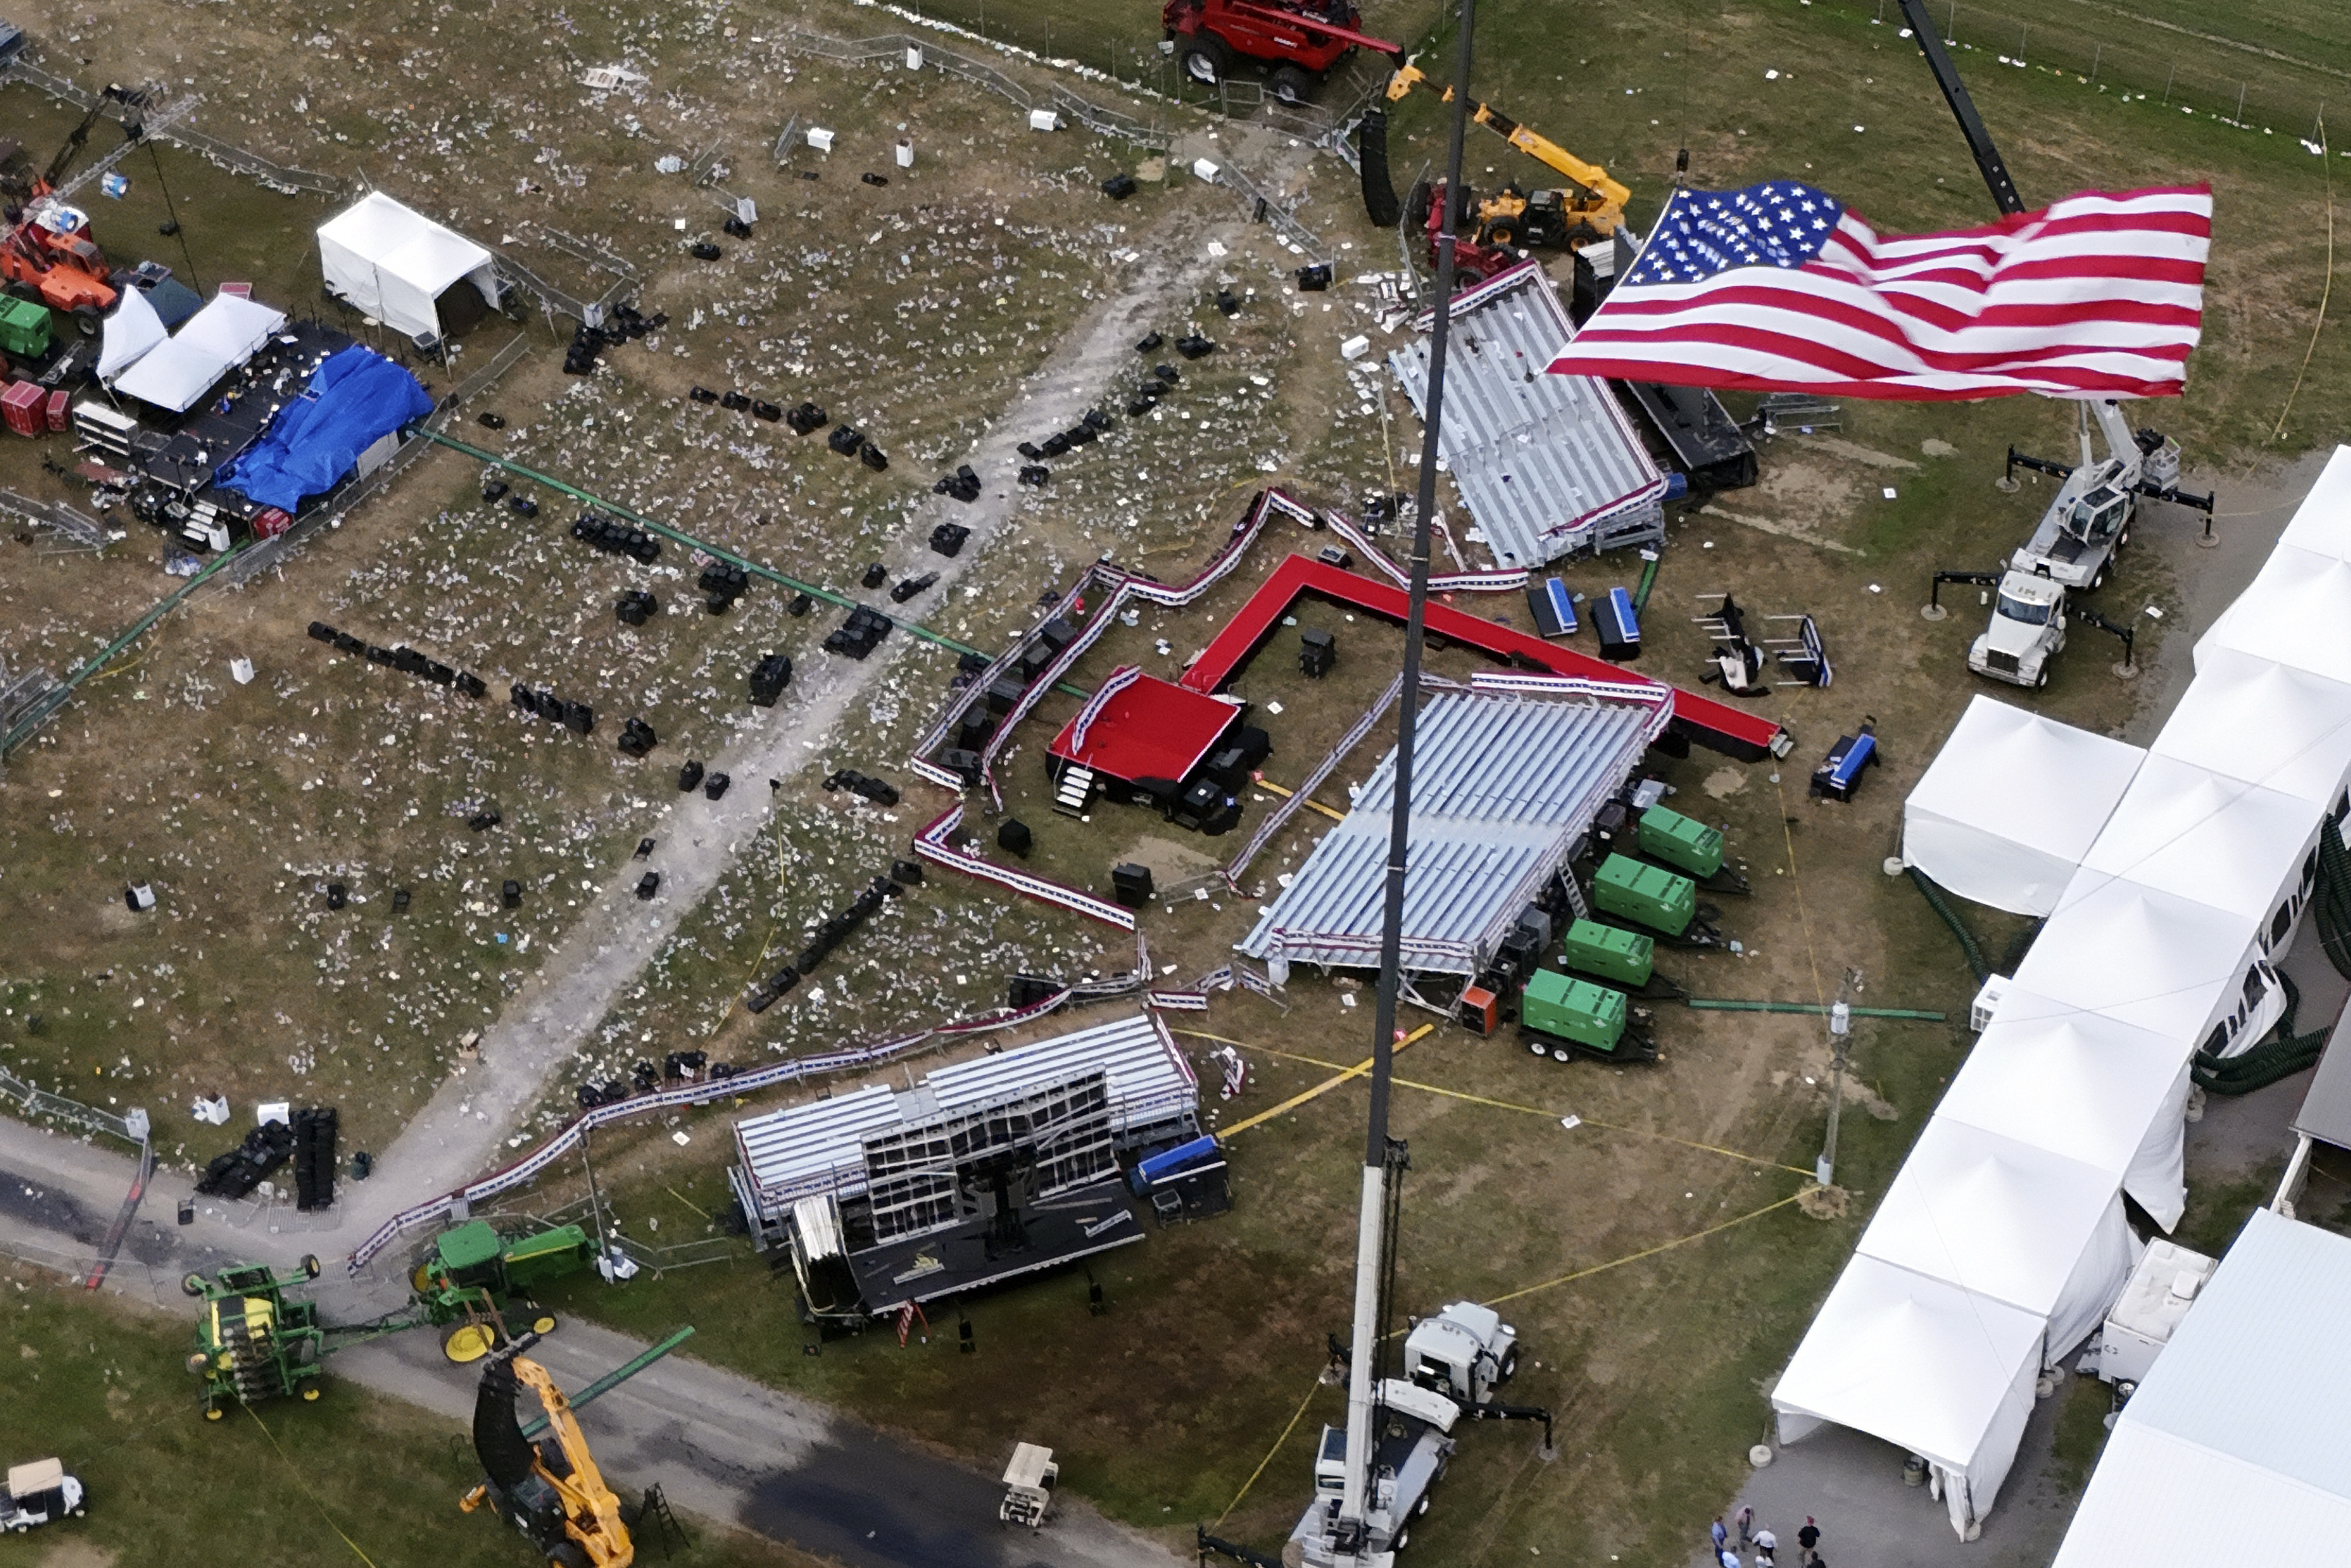 The Butler Farm Show, site of a campaign rally for Republican presidential candidate former President Donald Trump, is seen Monday July 15, 2024 in Butler, Pa. Trump was wounded on July 13 during an assassination attempt while speaking at the rally. (AP Photo/Gene J. Puskar)